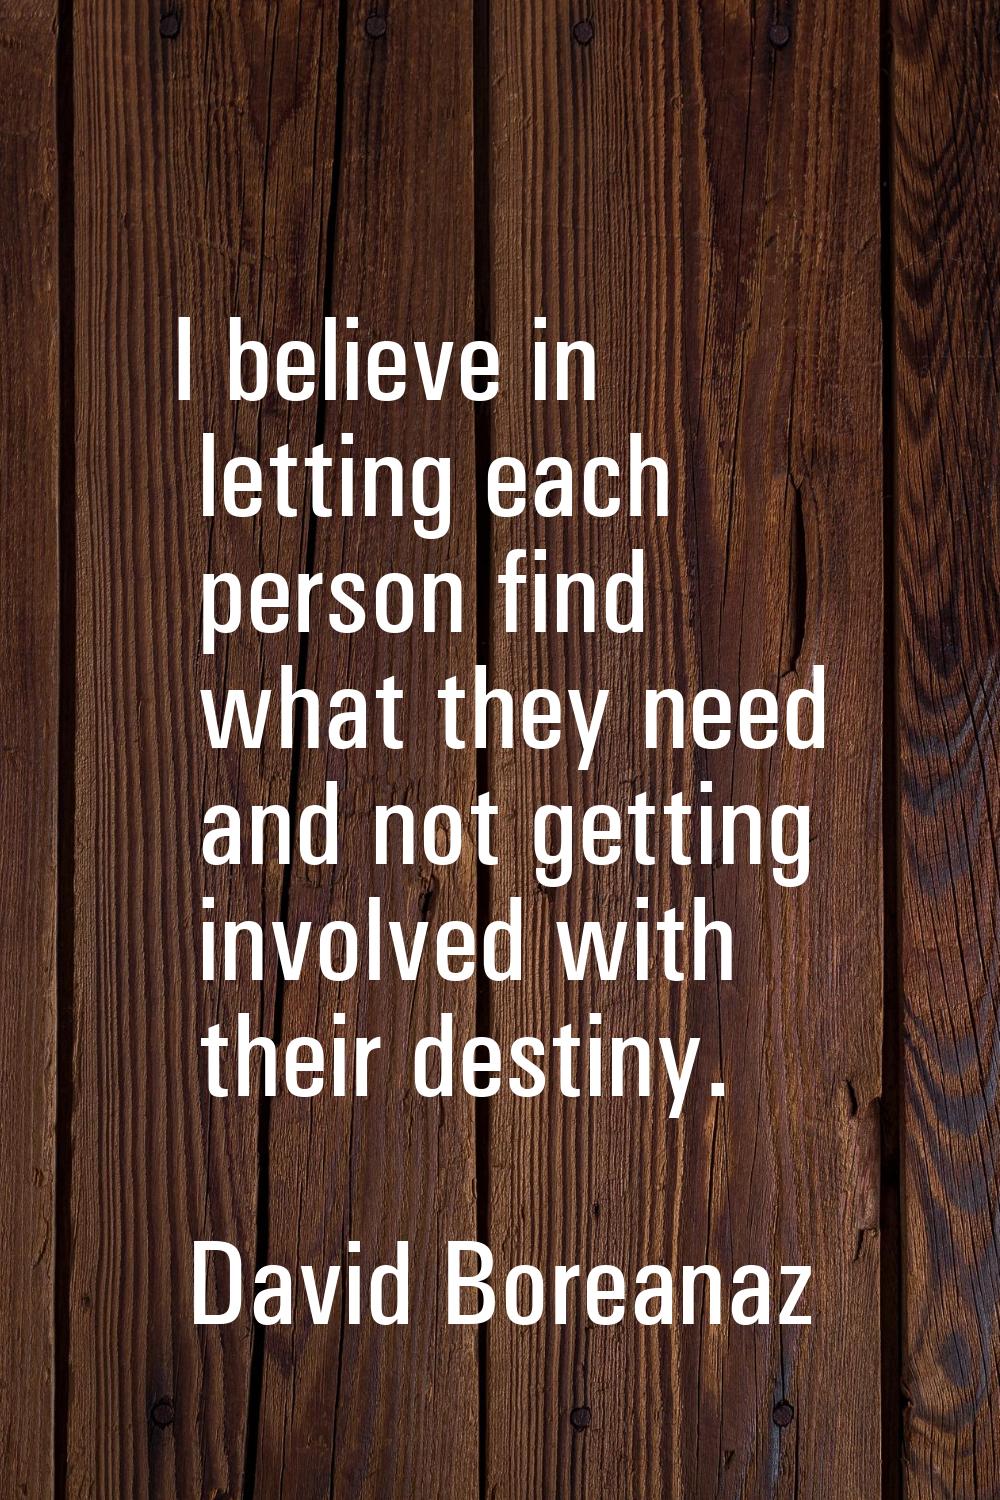 I believe in letting each person find what they need and not getting involved with their destiny.